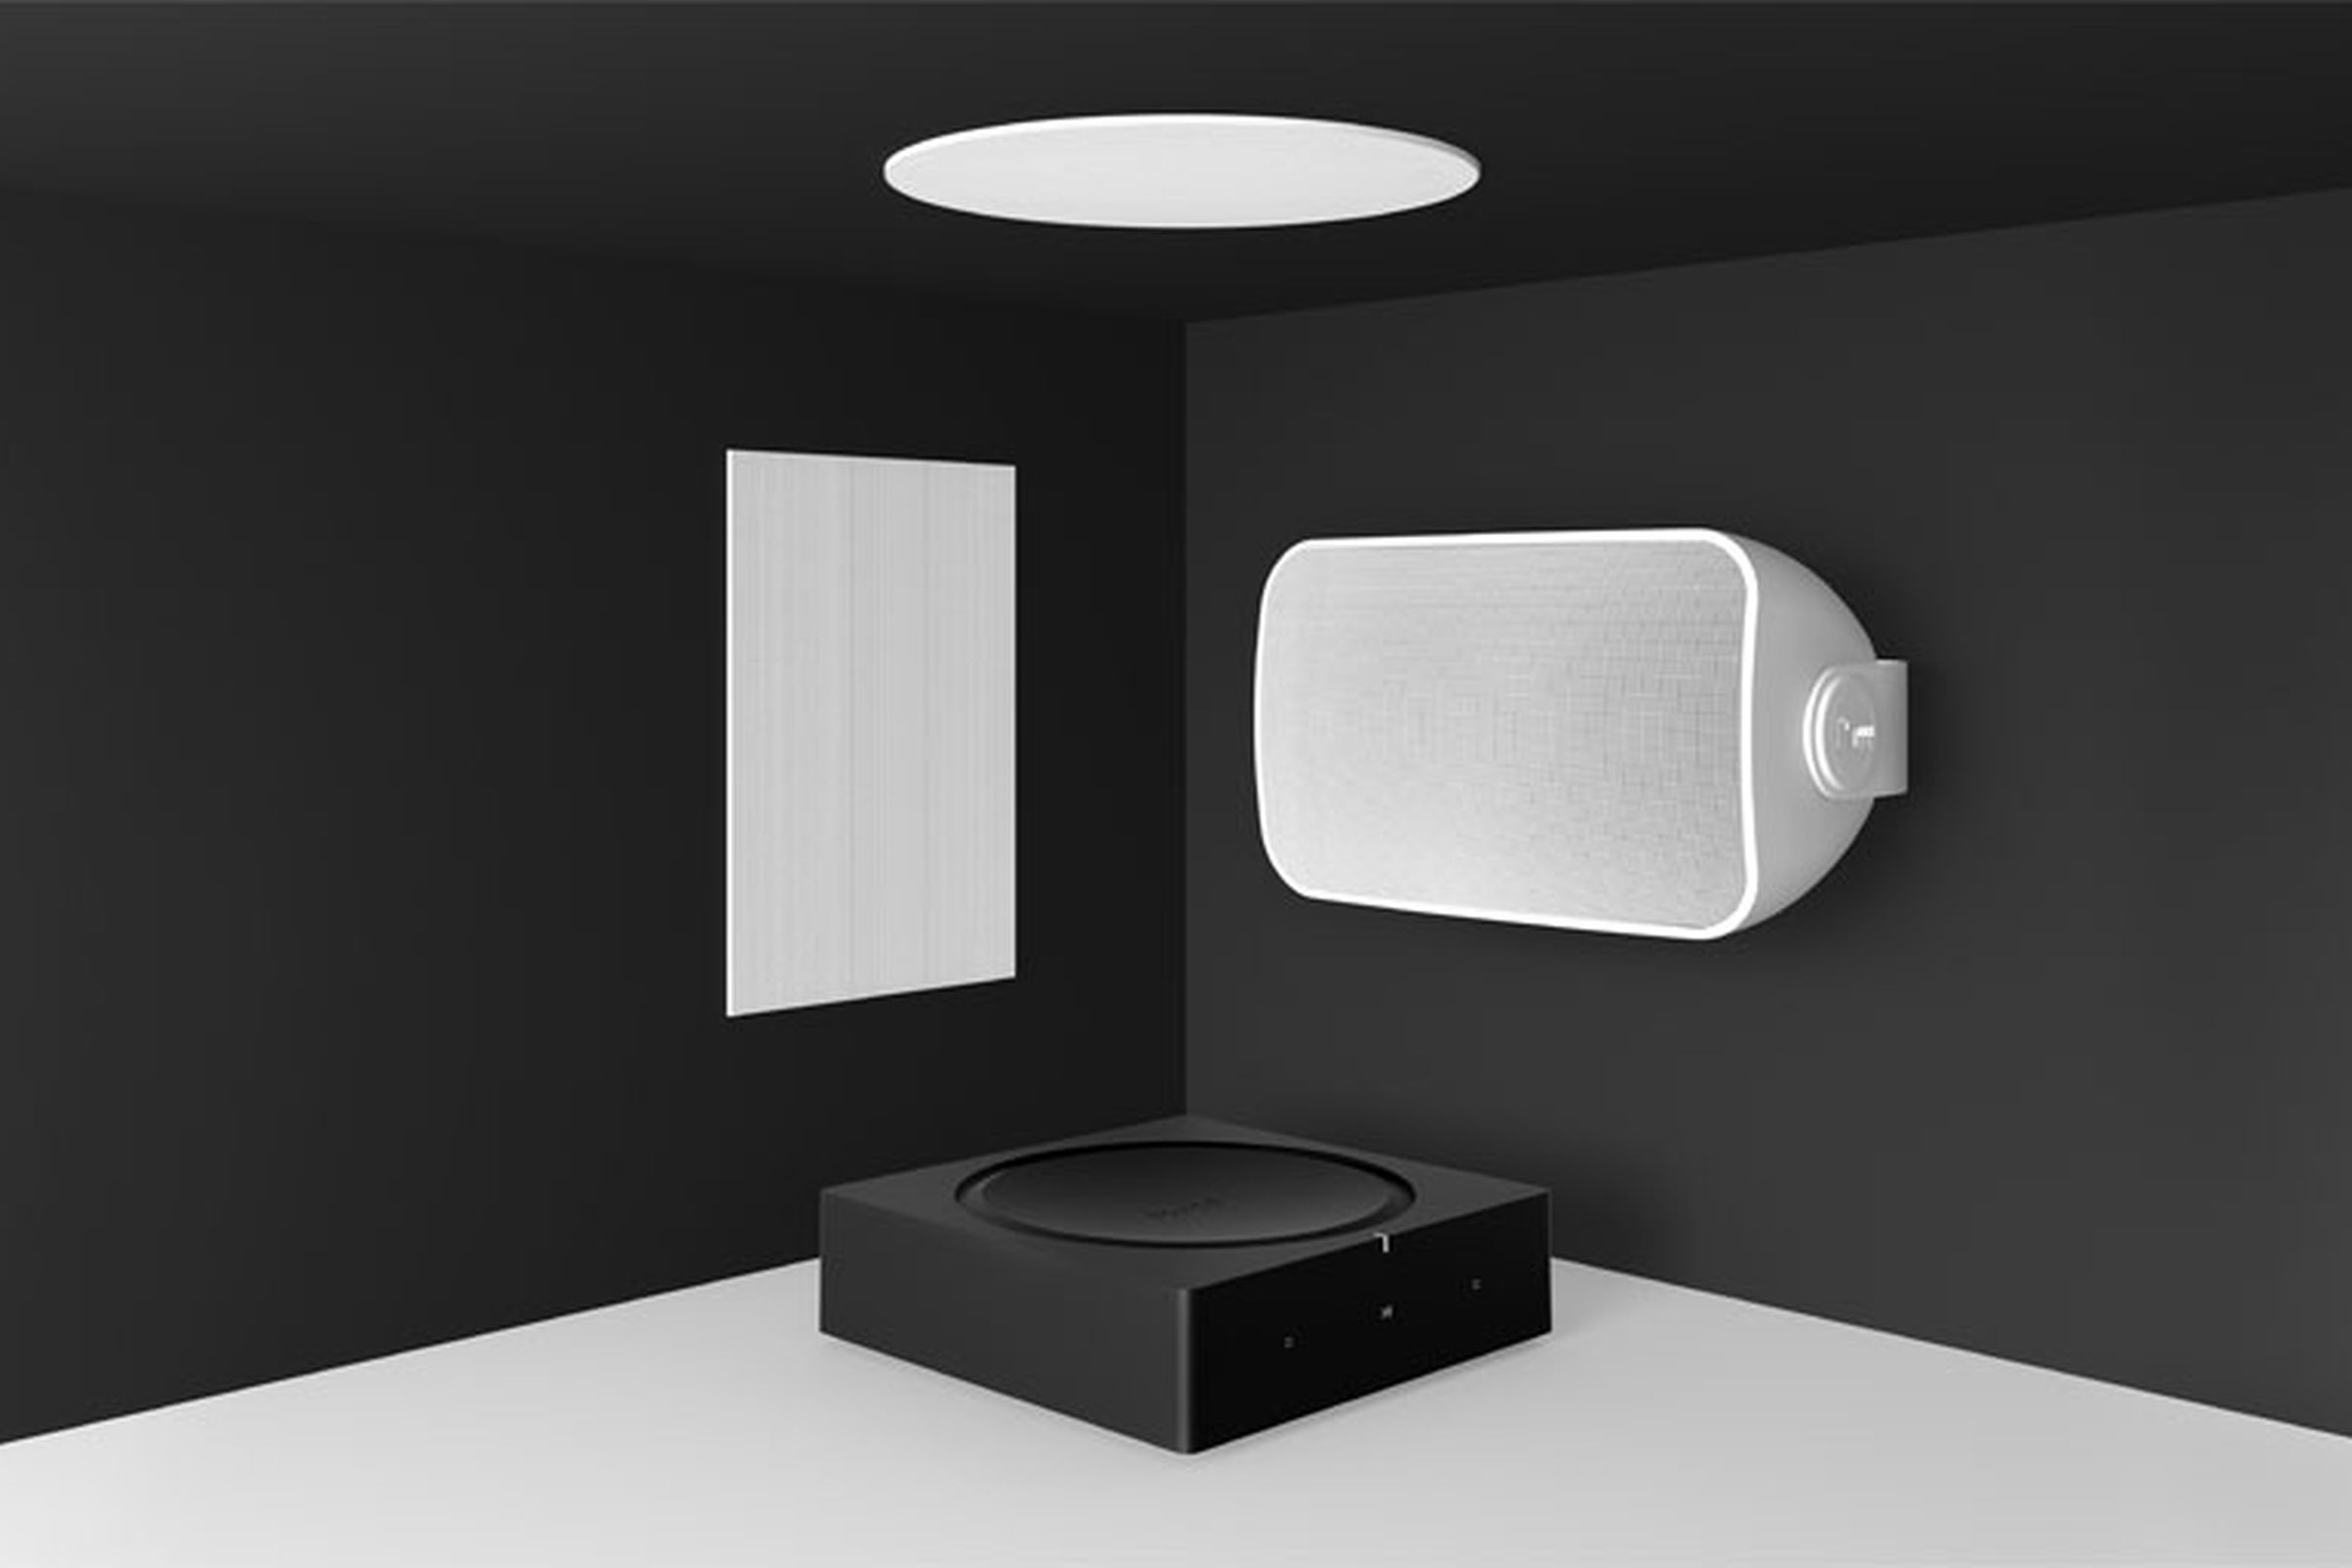 Sonos Amp flanked by new in-wall, in-ceiling, and outdoor speakers from Sonance.